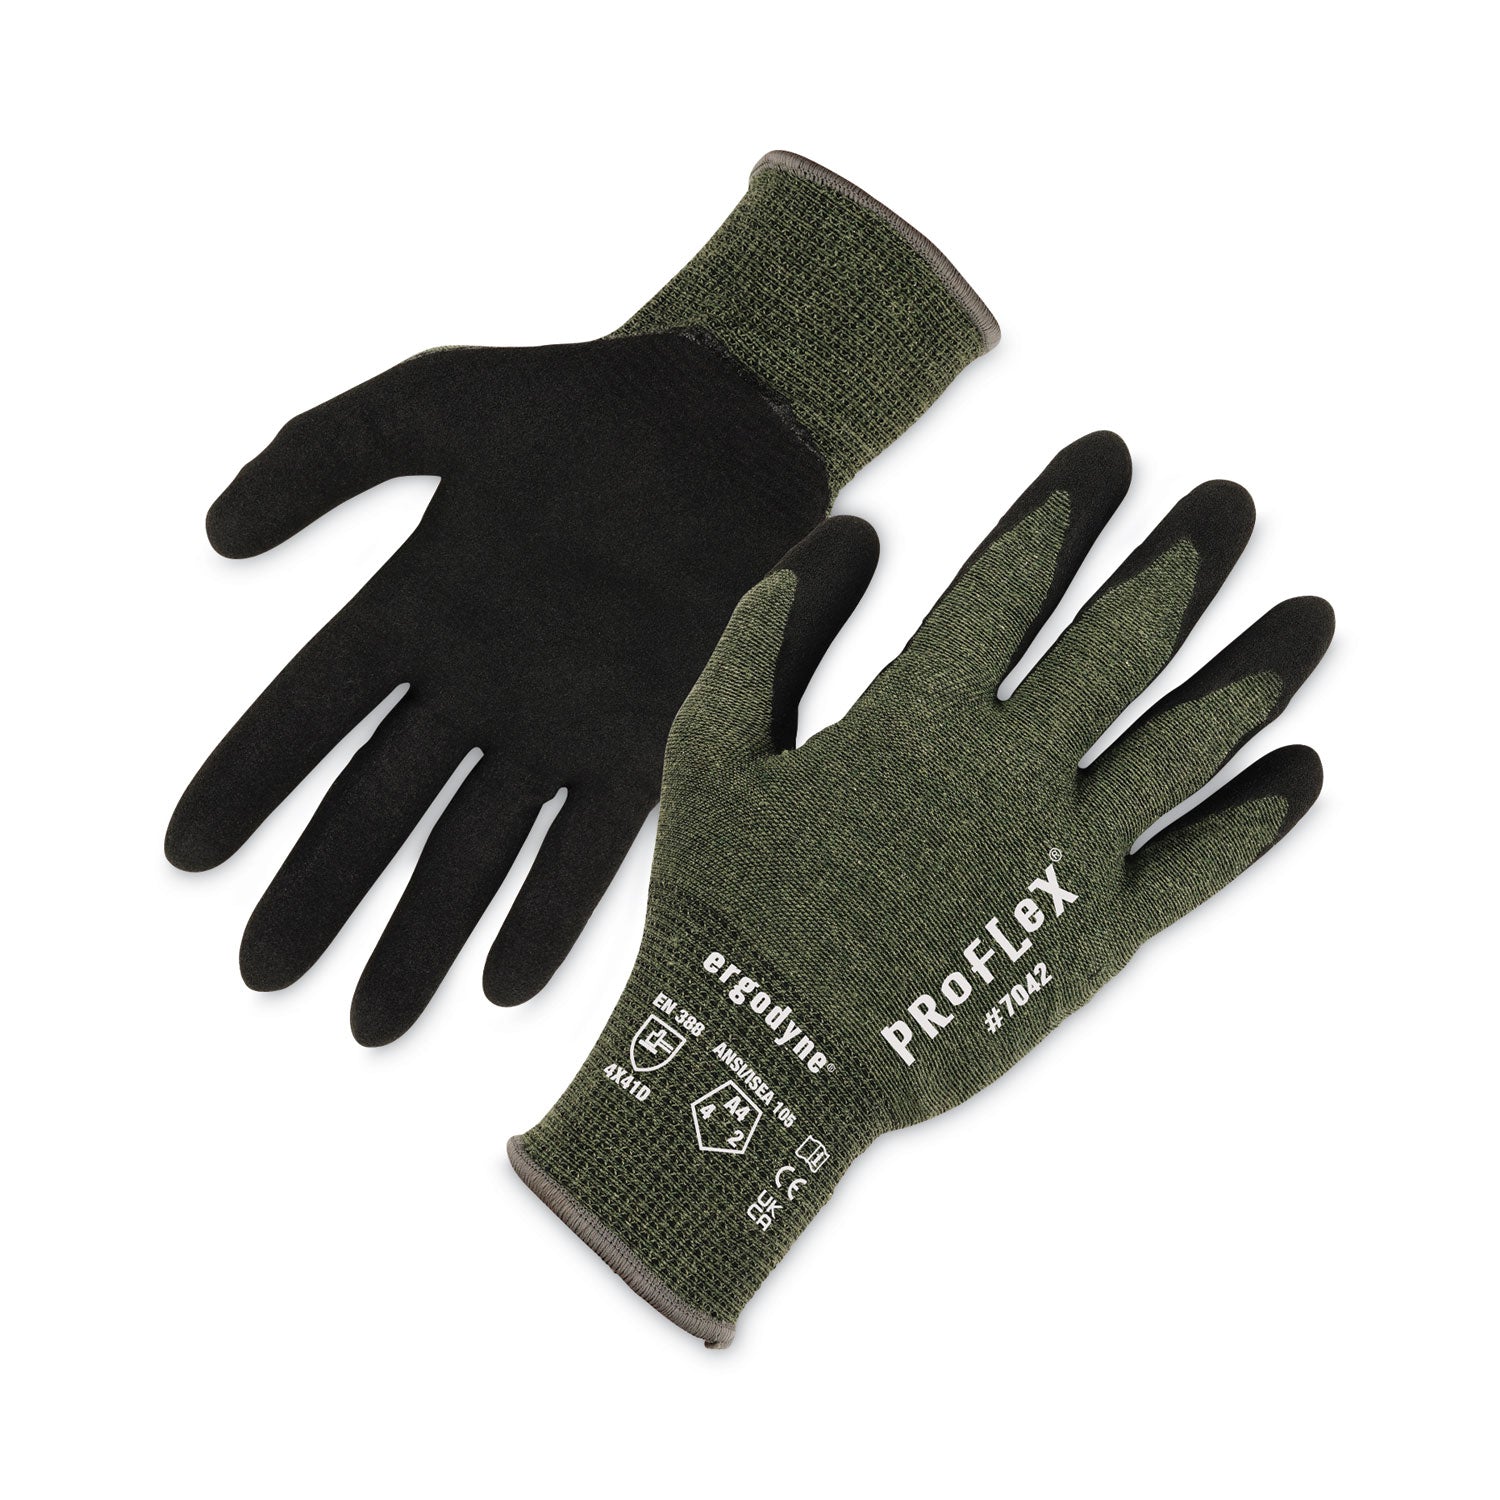 proflex-7042-ansi-a4-nitrile-coated-cr-gloves-green-medium-pair-ships-in-1-3-business-days_ego10343 - 1